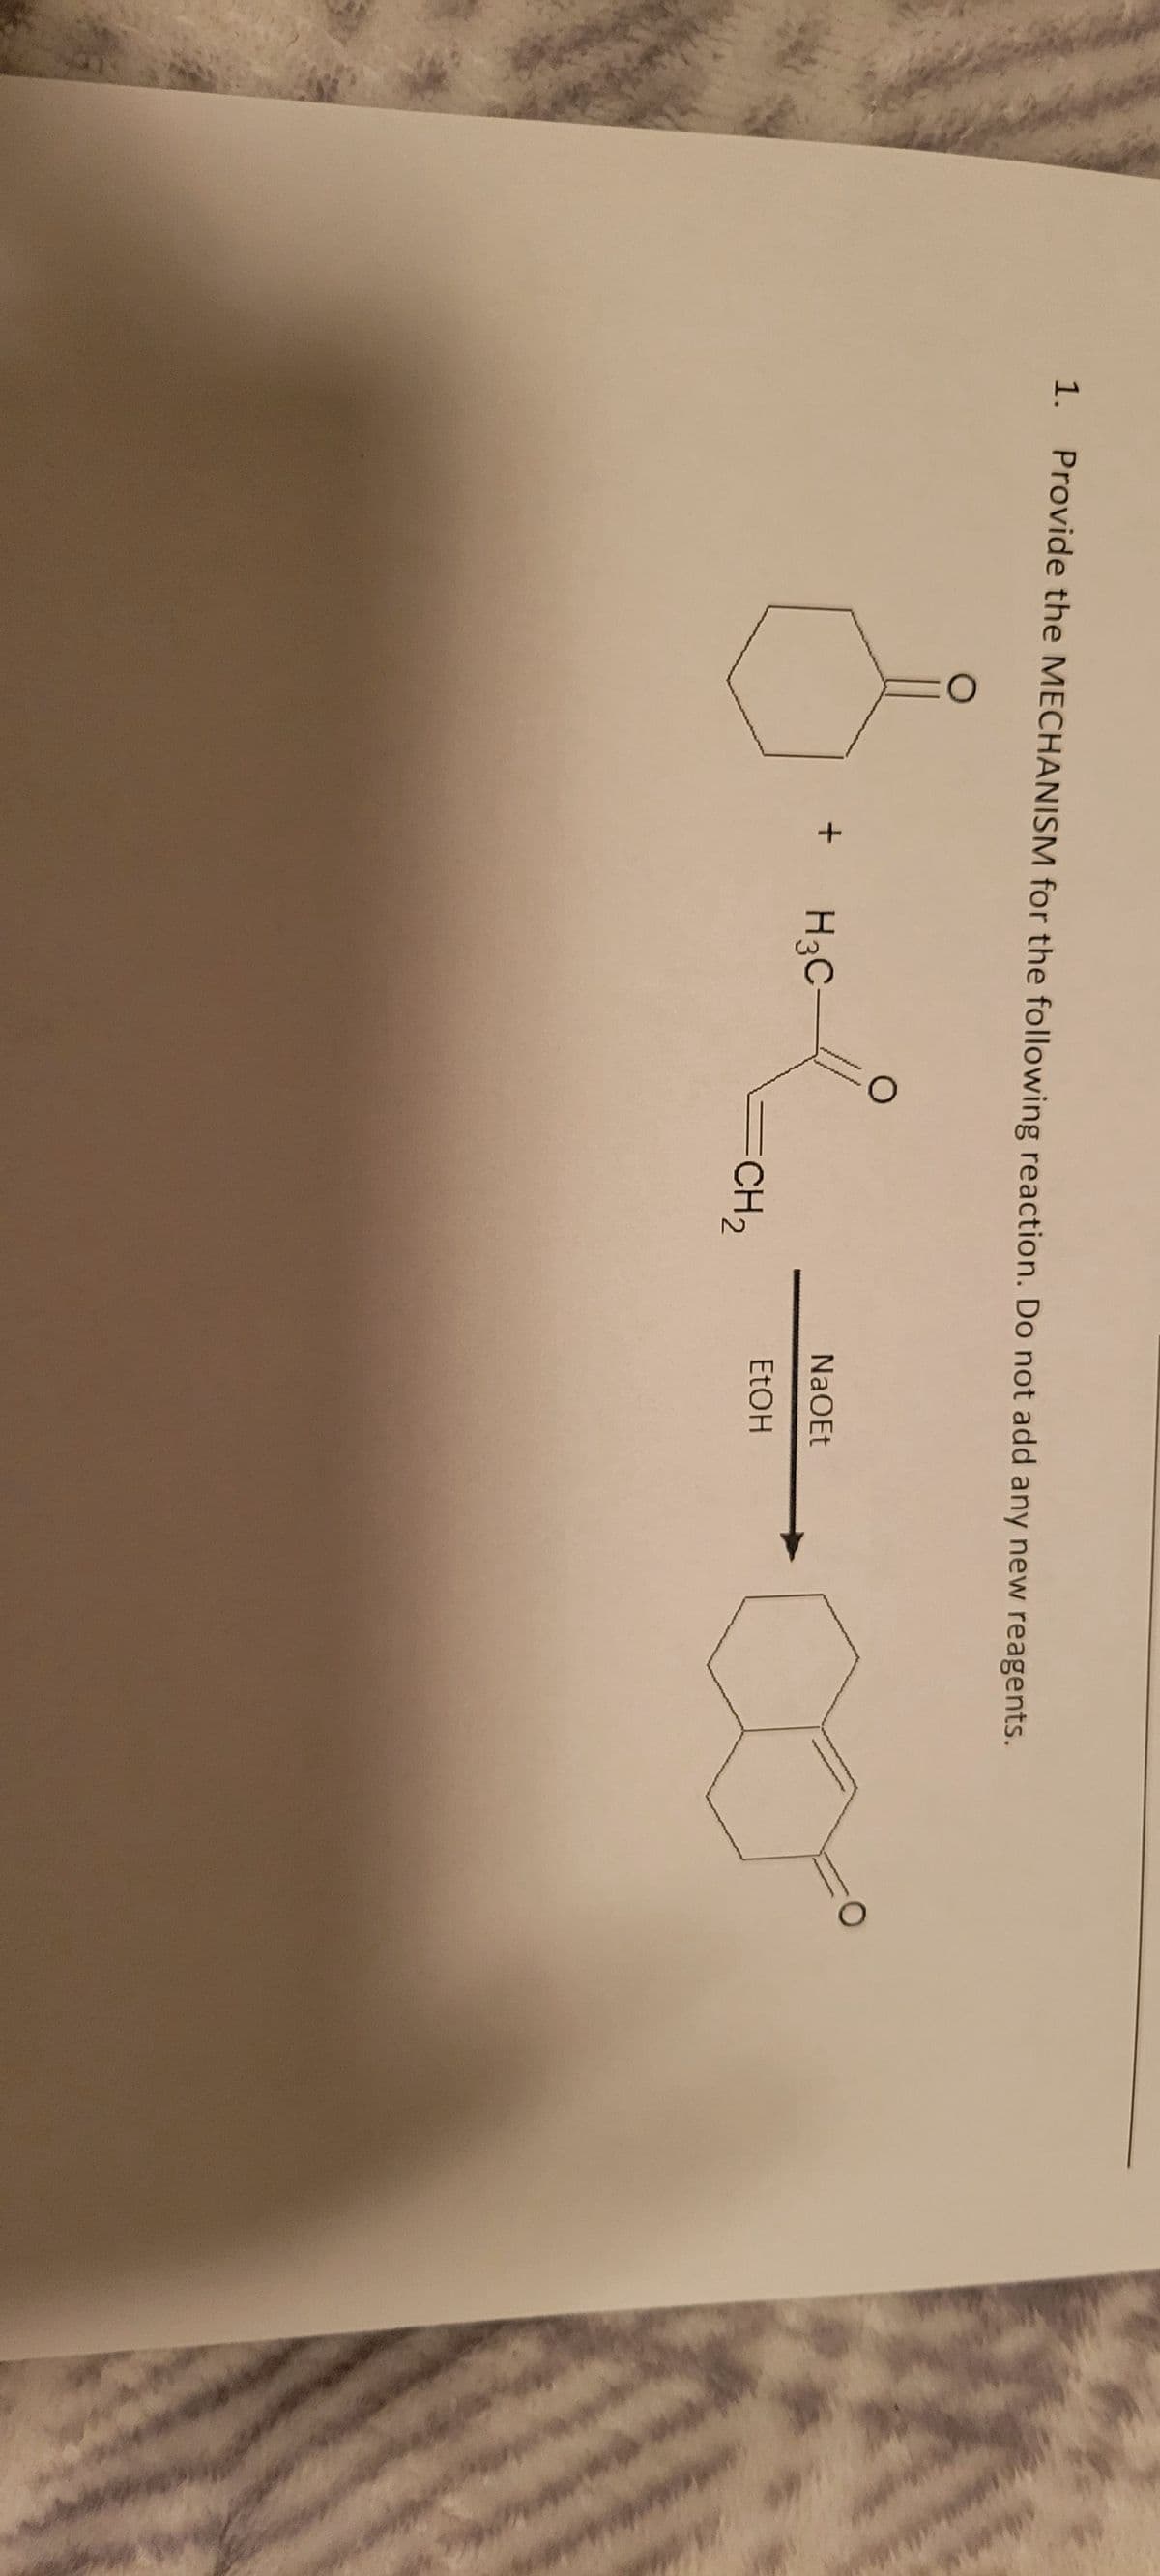 1. Provide the MECHANISM for the following reaction. Do not add any new reagents.
O
+
H3C
O
=CH ₂
NaOEt
EtOH